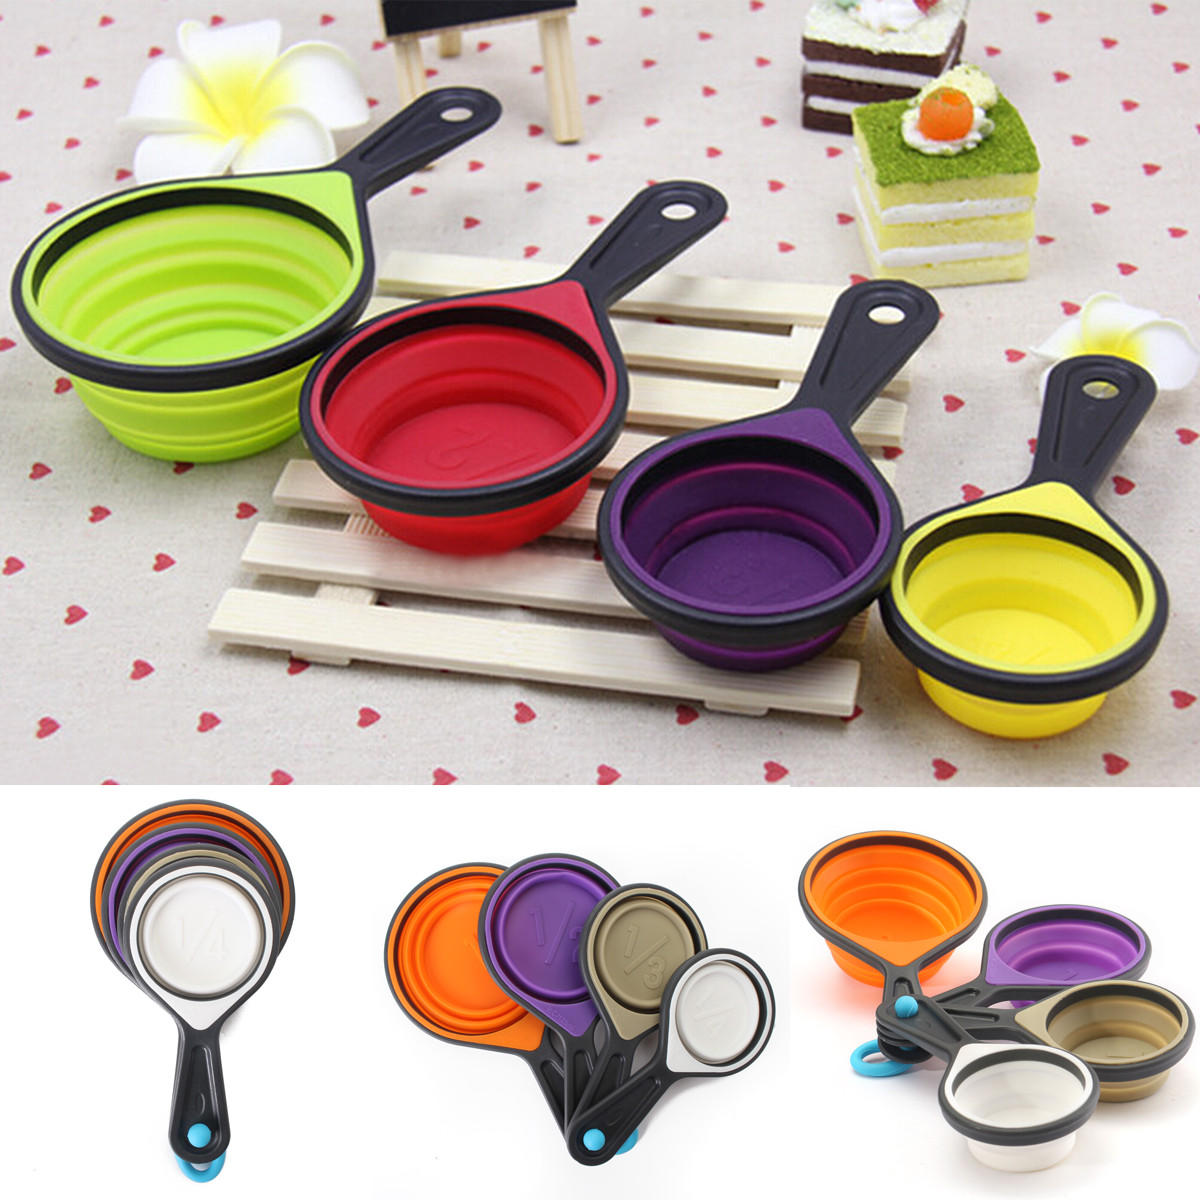 4Pcs Silicone Measuring Cups Set Spoon Kitchen Tool Collapsible Baking Cook